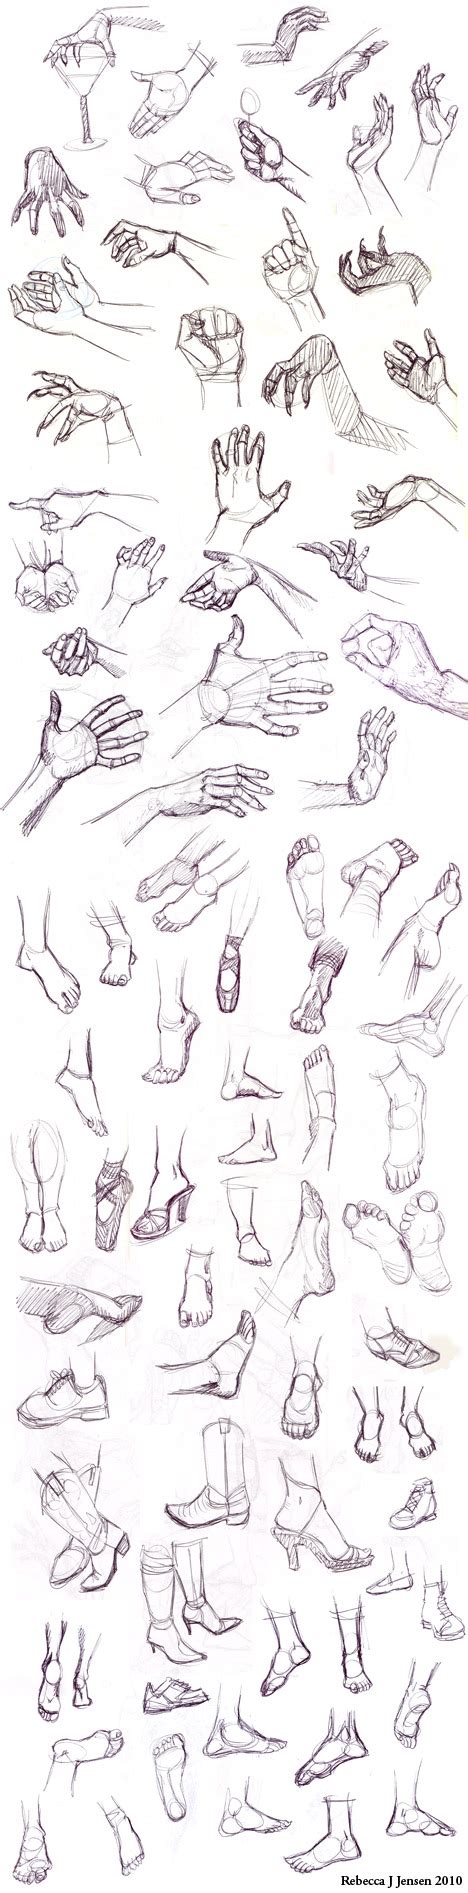 Hands And Feet Sketches By Purplerebecca On Deviantart